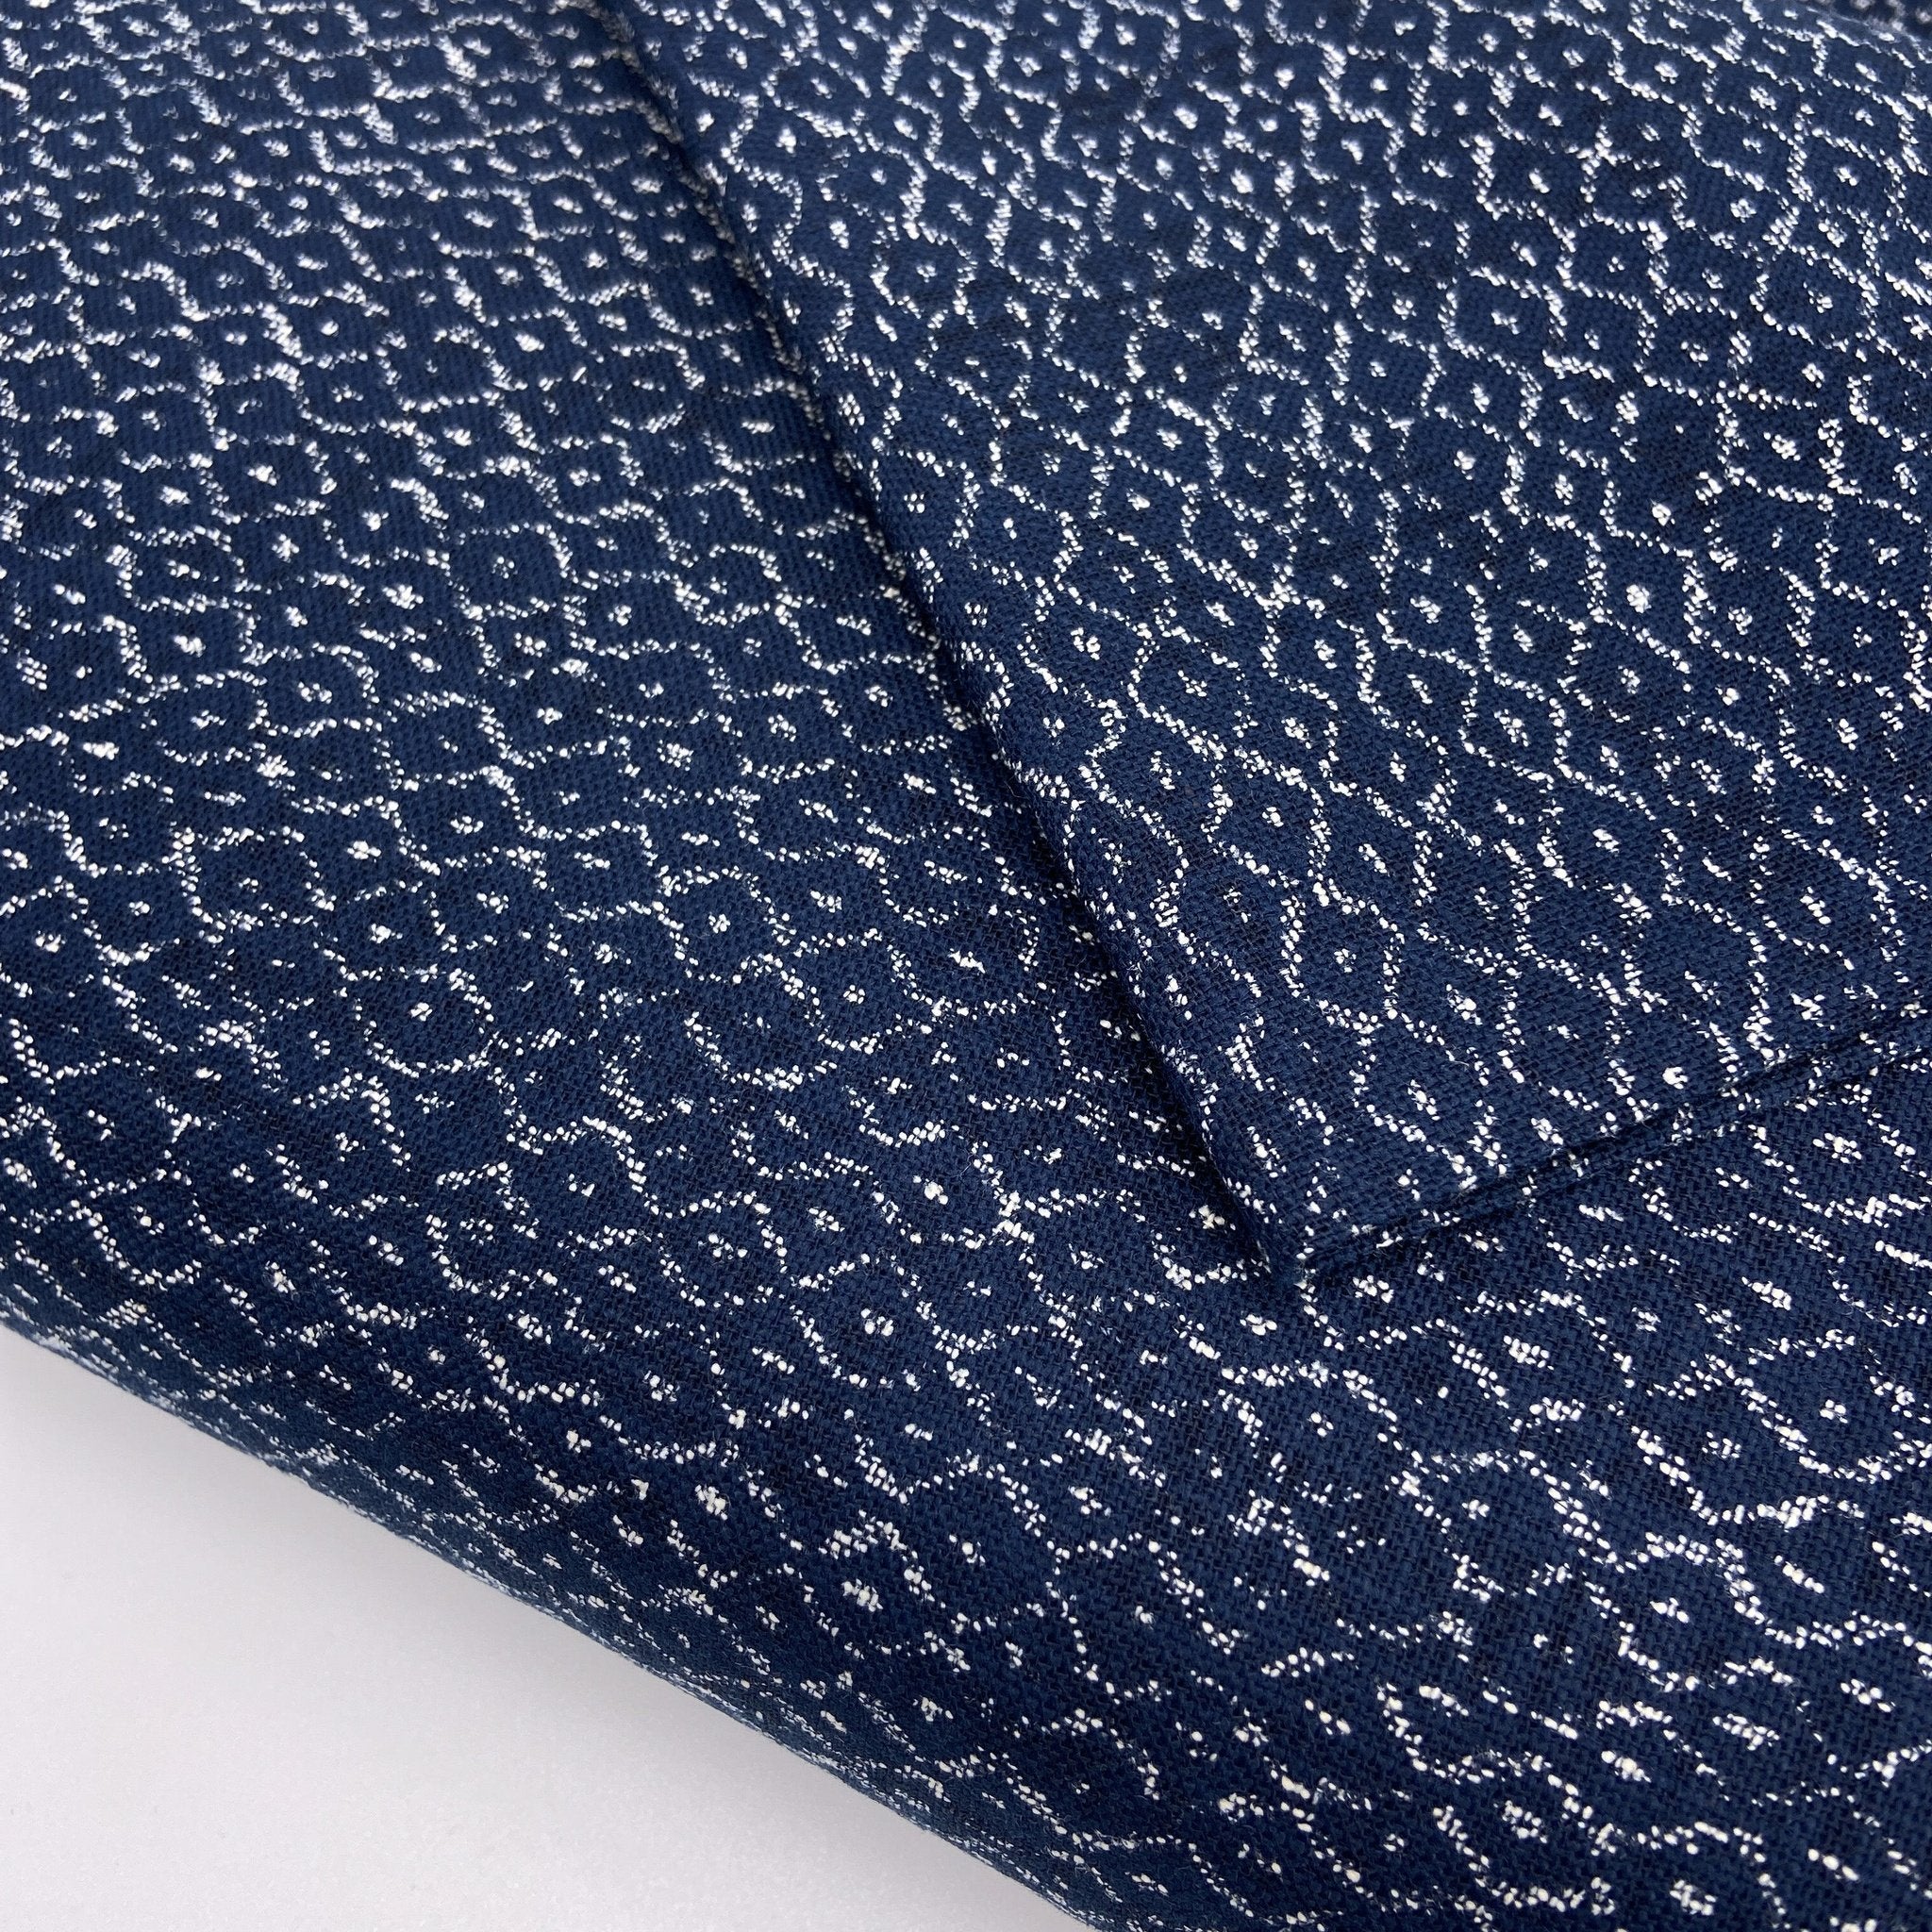 Japanese Cotton Uneven Yarns Sheeting Print - Indigo Staggered Wave